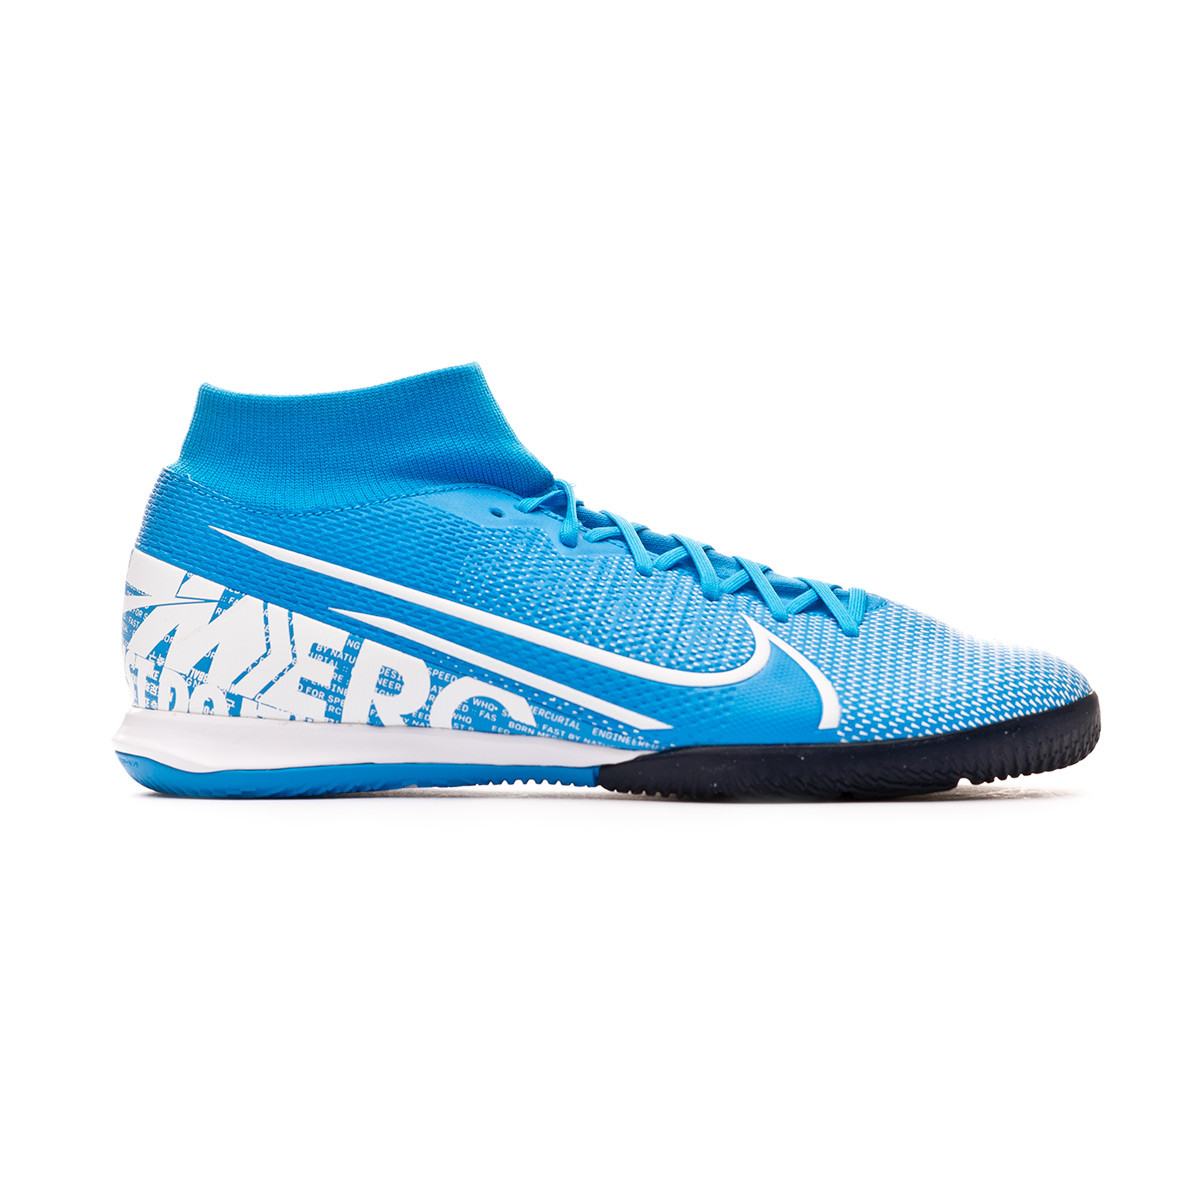 Soccer Nike Mercurial Superfly 6 Academy MG Soccer Cleat